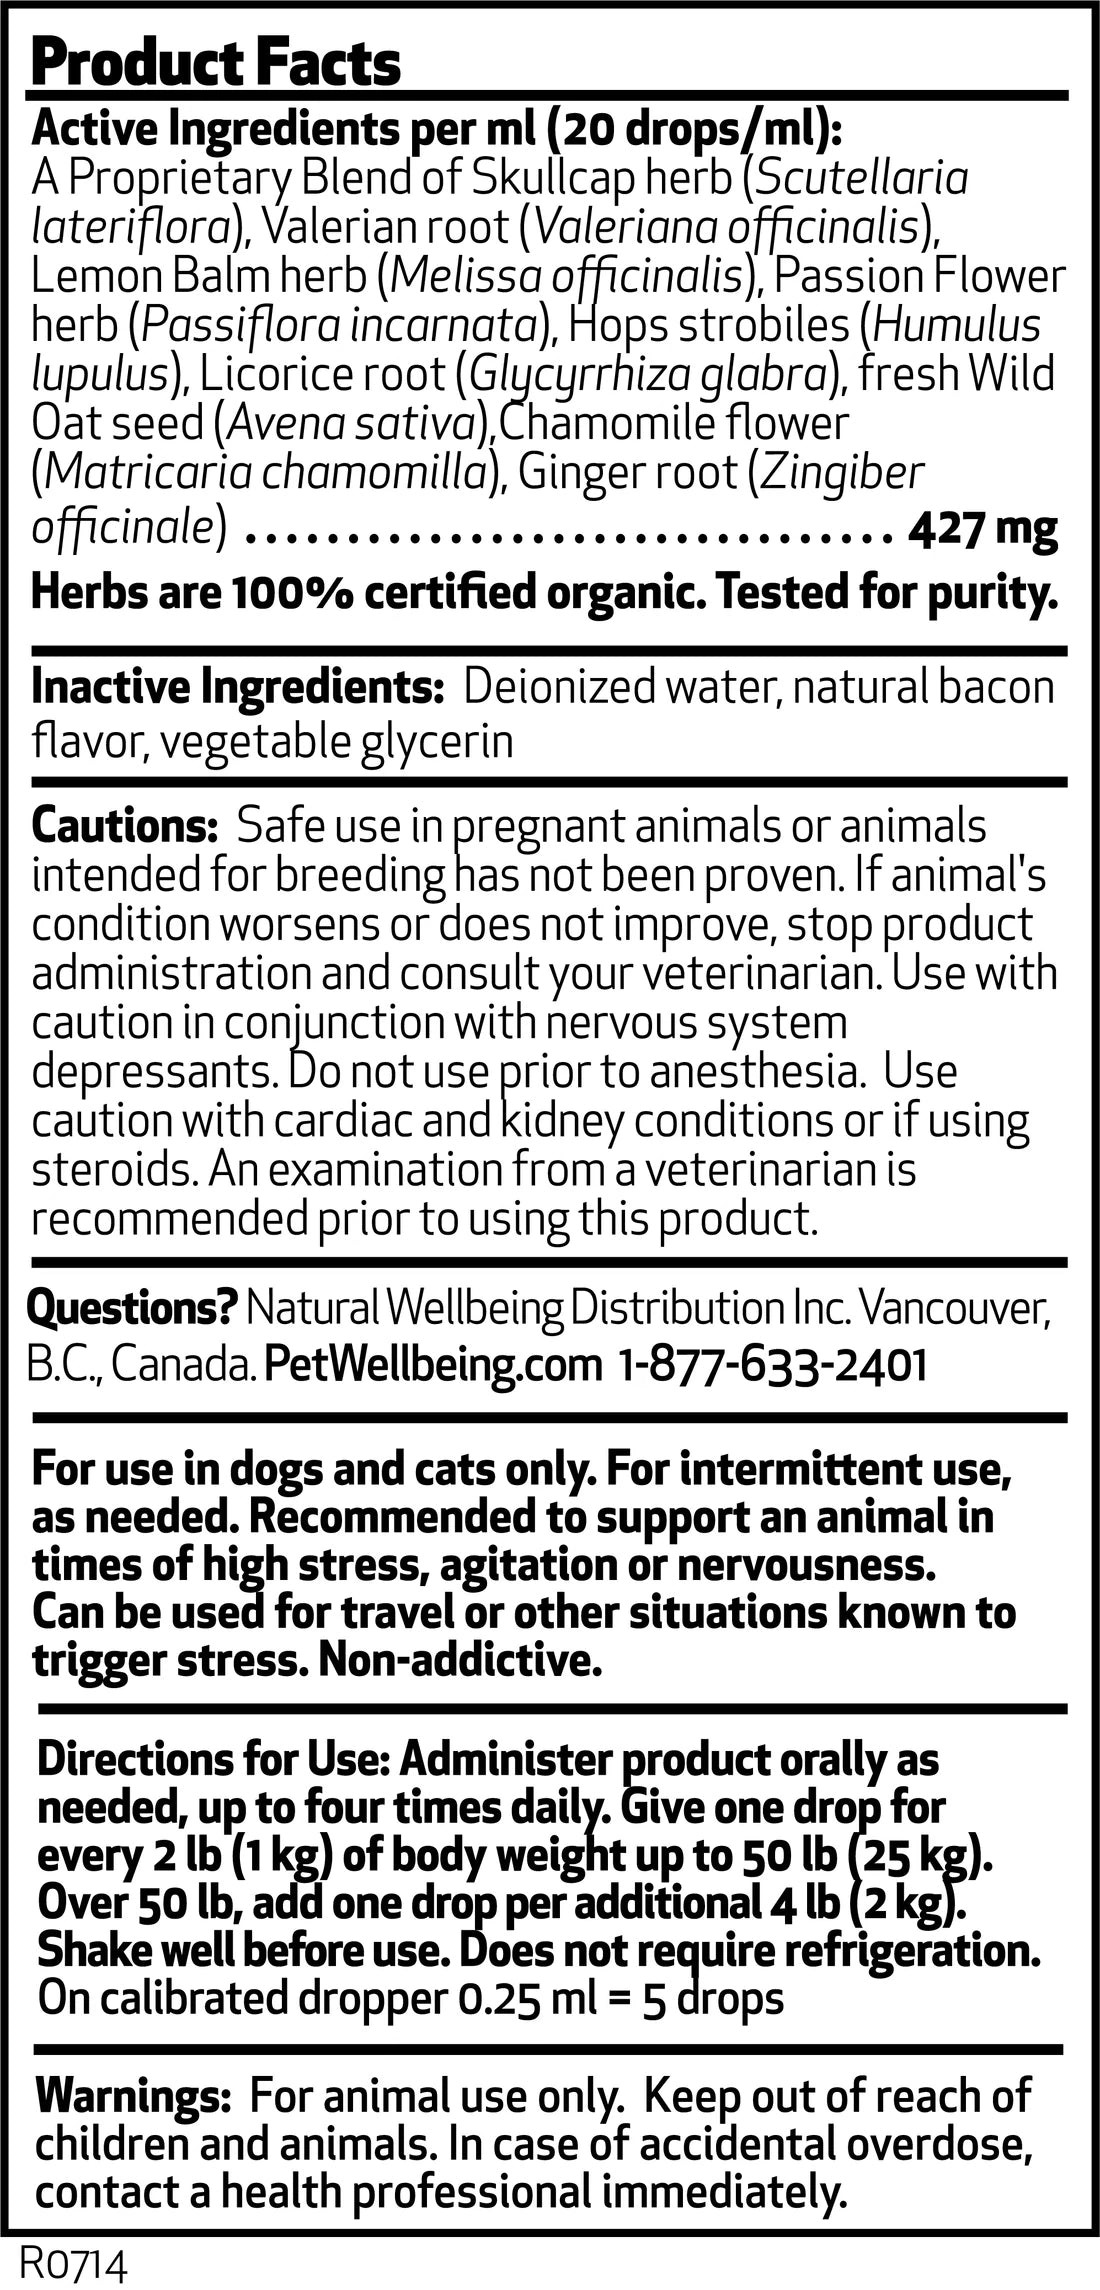 Pet Wellbeing - Stress Gold (Dogs) - 2oz.